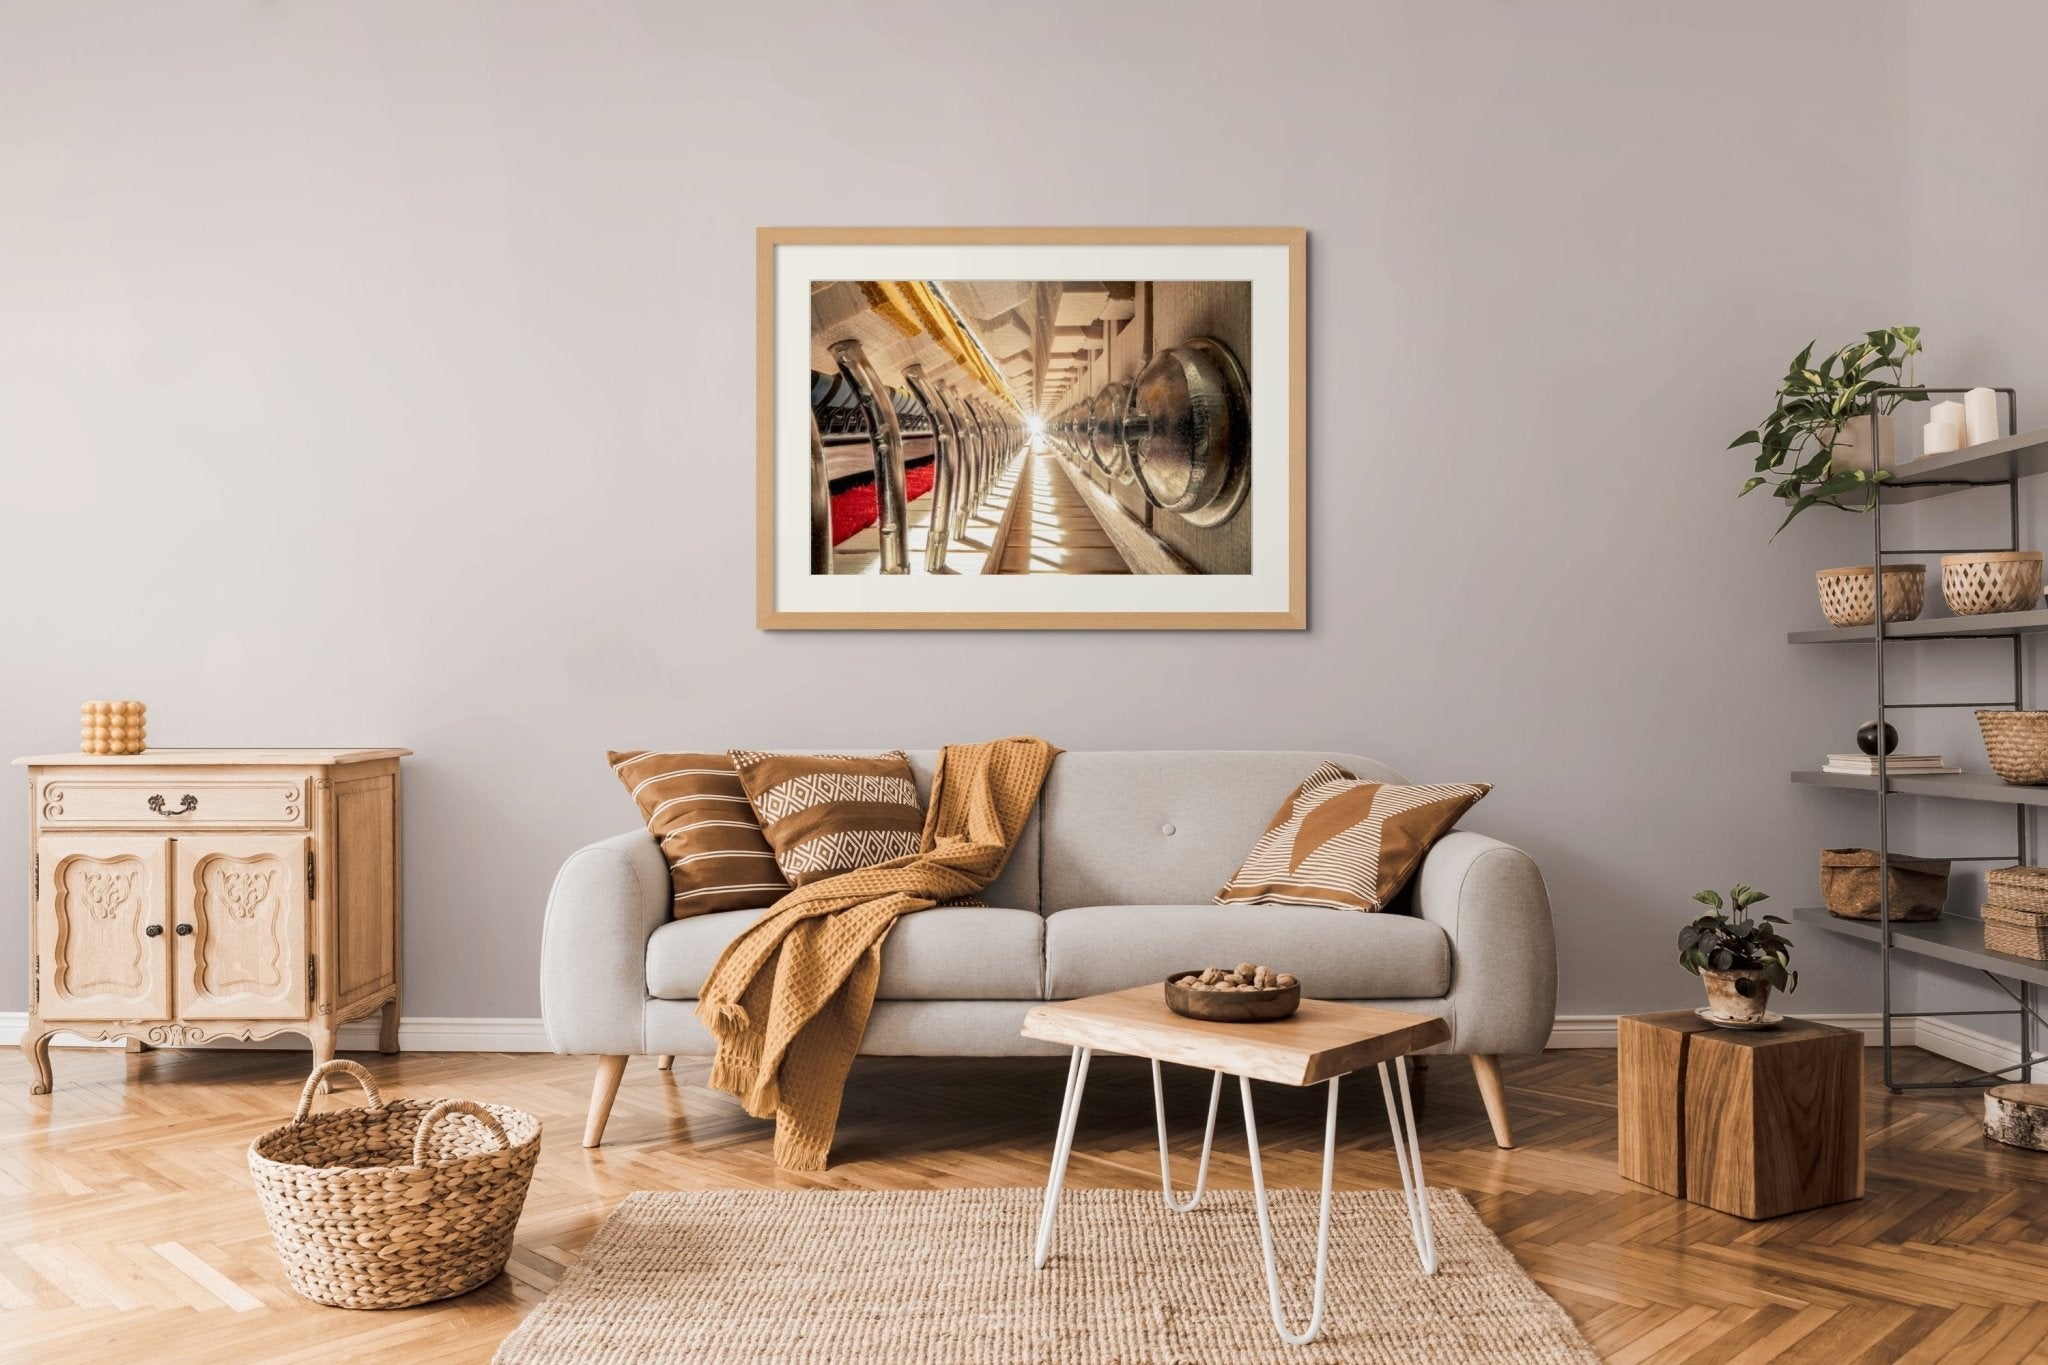 Photo of Fazioli Grand Piano Part 2. Signed Limited Edition Museum Quality Print. - Giclée Museum Quality Print - Architecture In Music